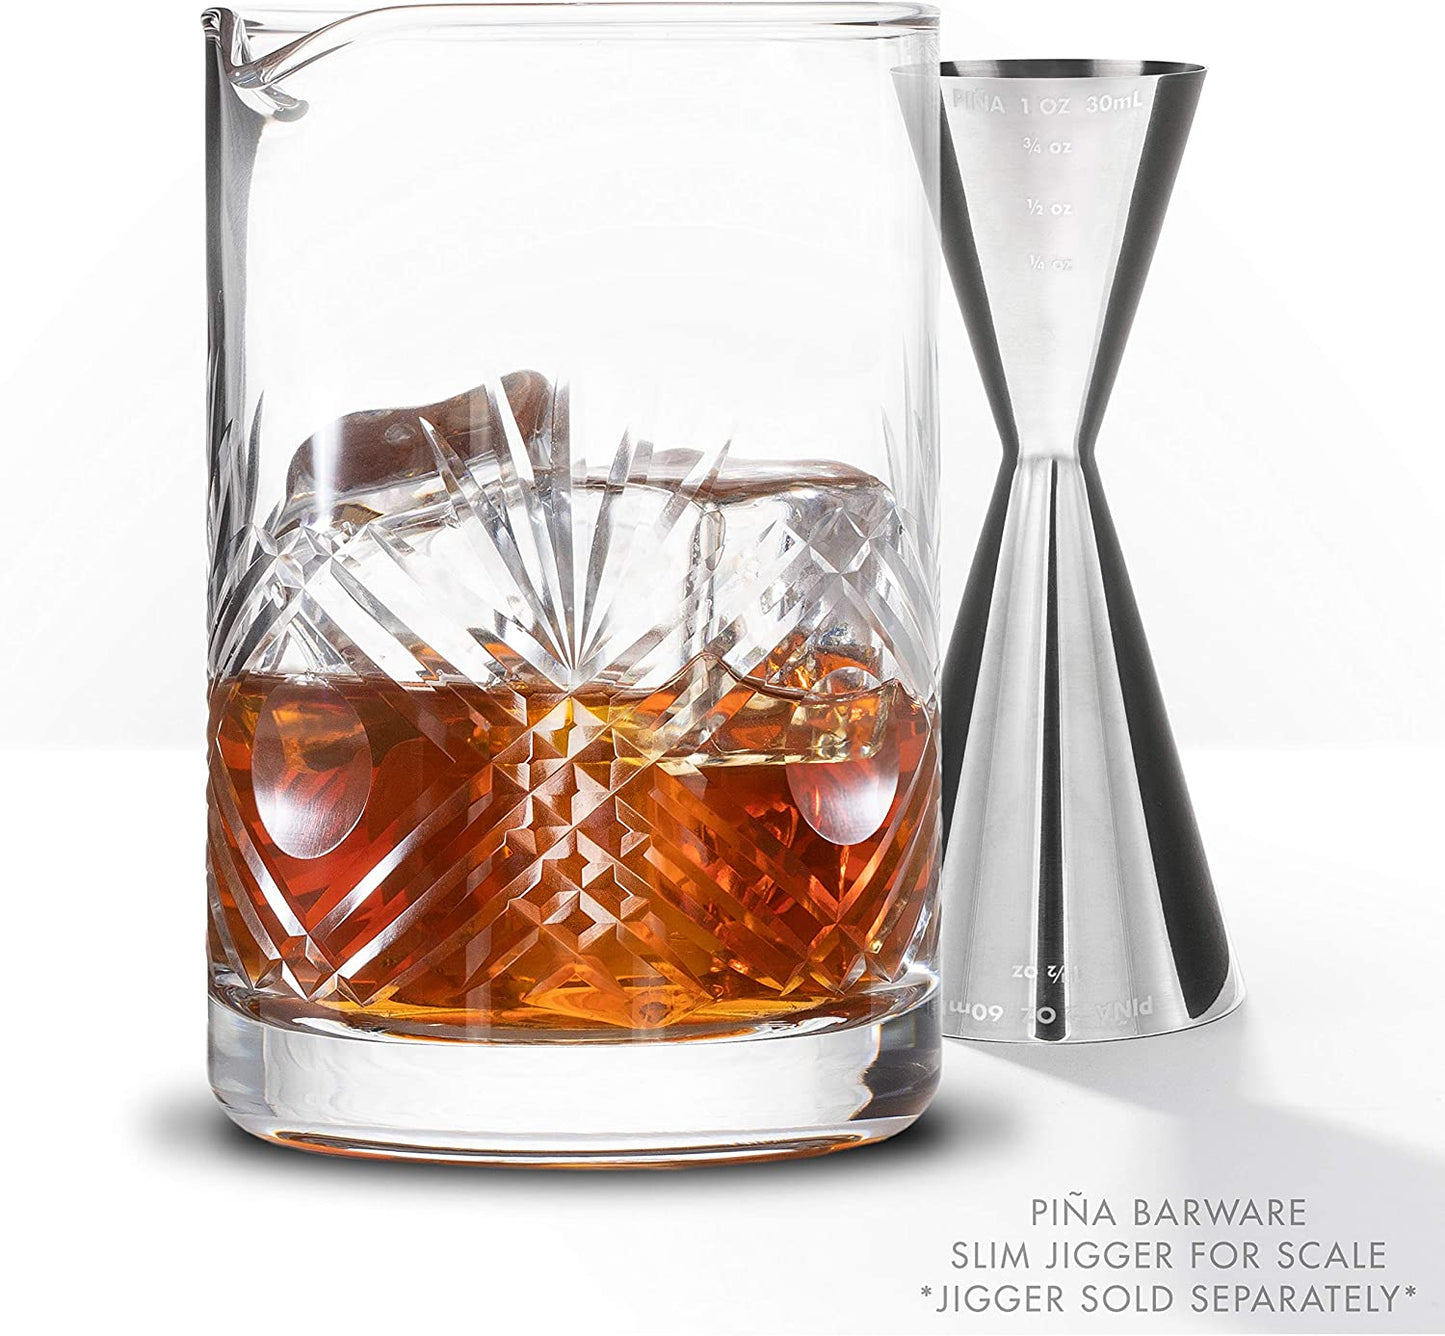 Seamless Hand Cut Mixing Glass - 550Ml / 18Oz - Professional Bartending Commercial Glassware